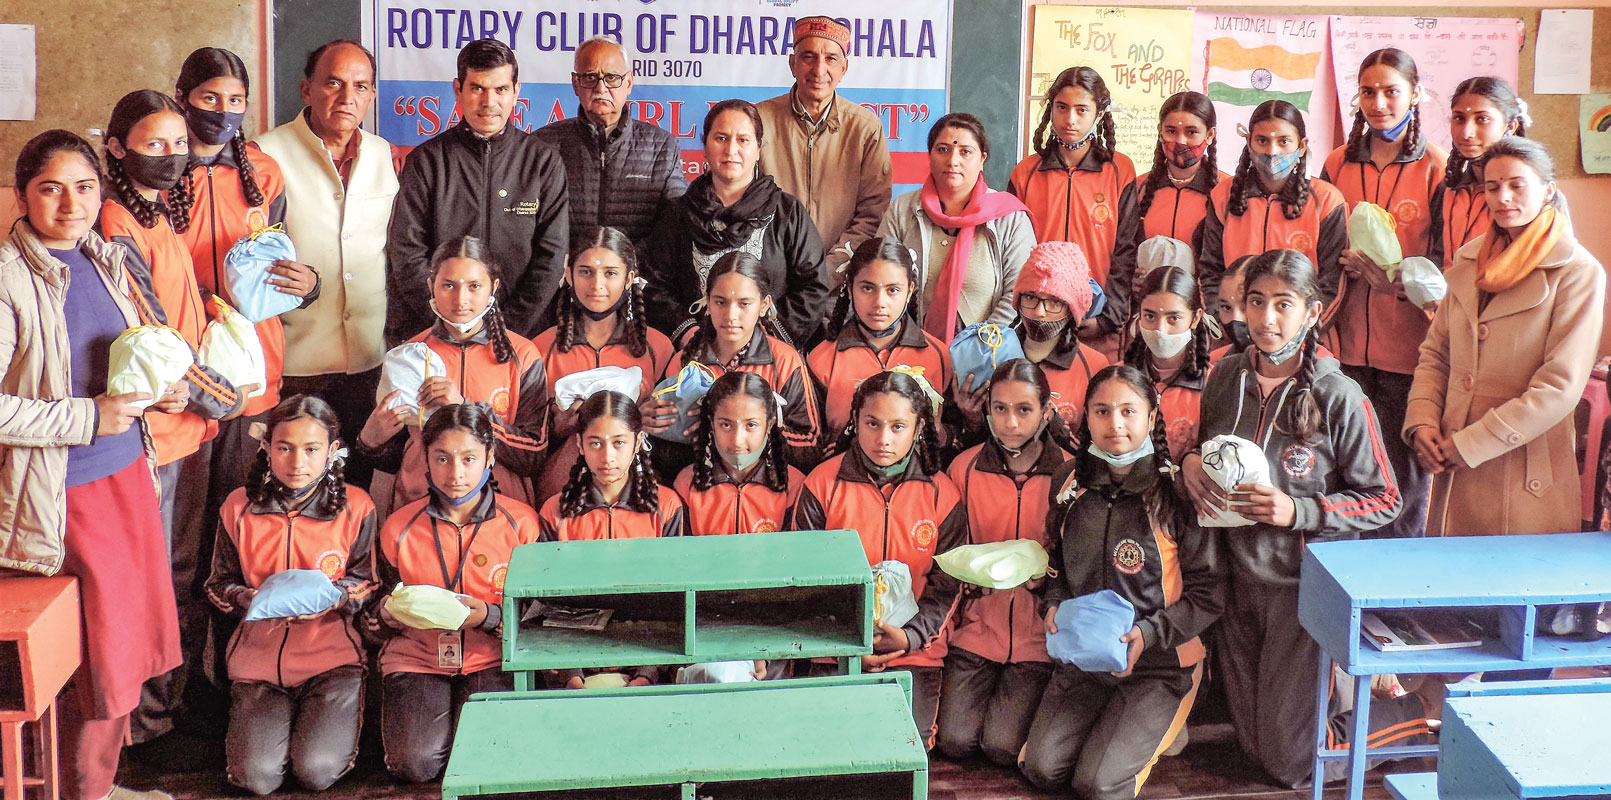 Members of RC Dharamshala (from L) Hari Singh, Milap Nehria, Sangram Guleria, Dr Harmeet Kaur and Y K Dogra with students after distributing reusable sanitary pads to them.